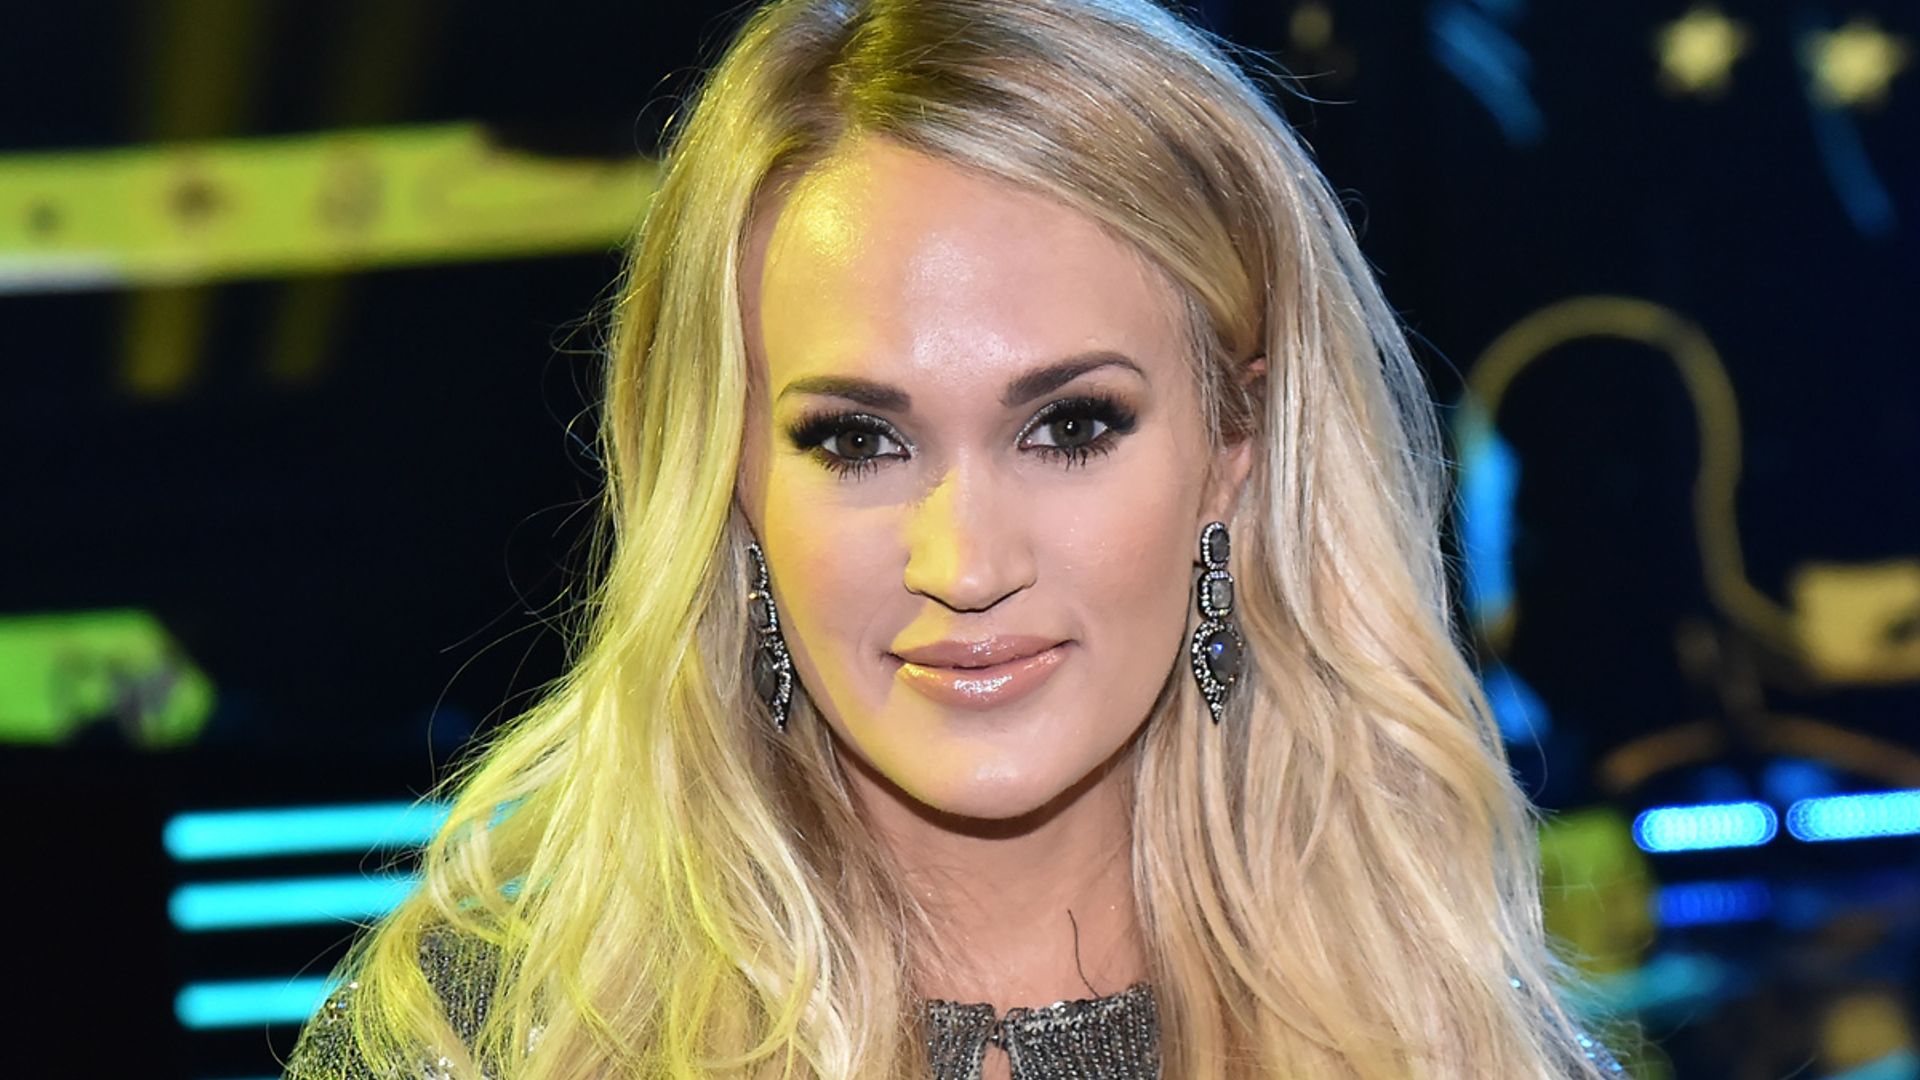 Popoholic » Blog Archive » Carrie Underwood's Wicked Little Legs In  Skin-Tight Jeans? Yes Please!